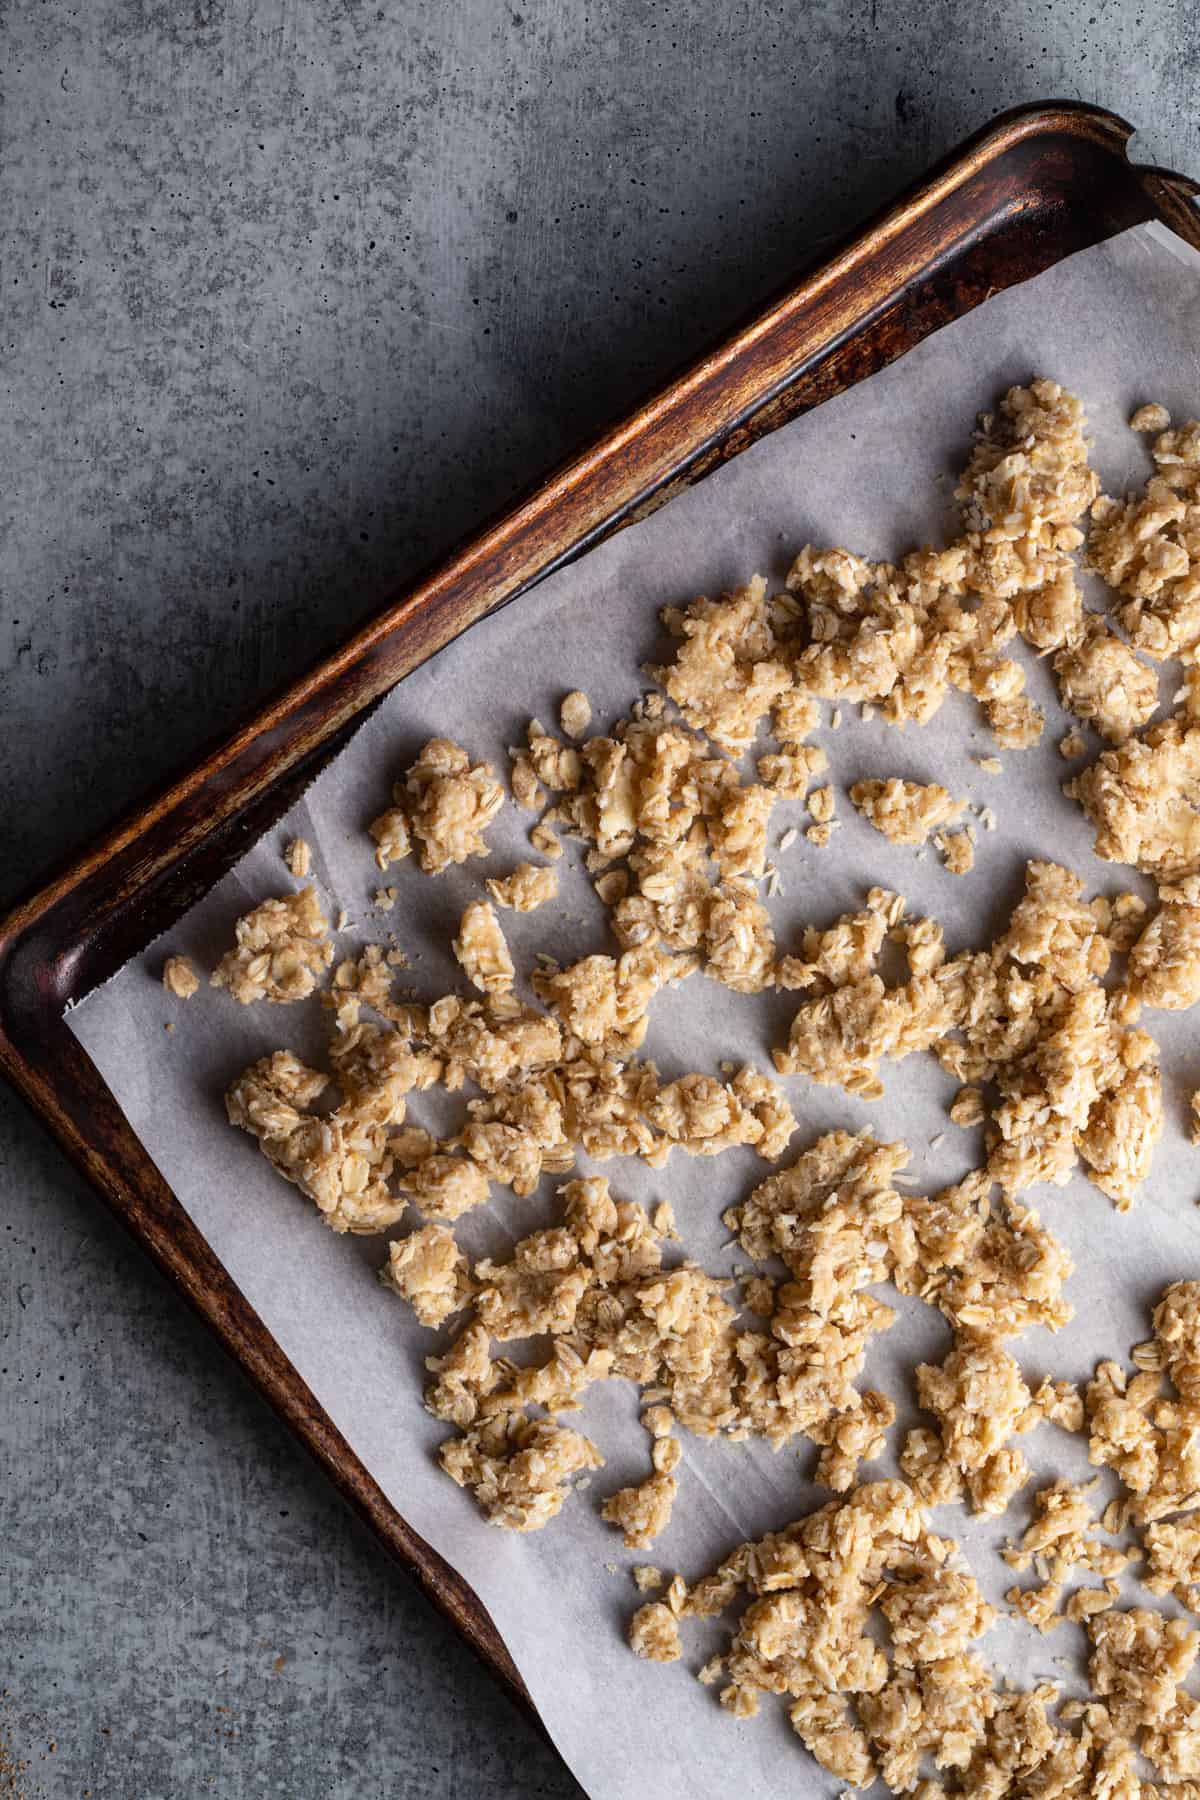 crumble spread out on a baking sheet